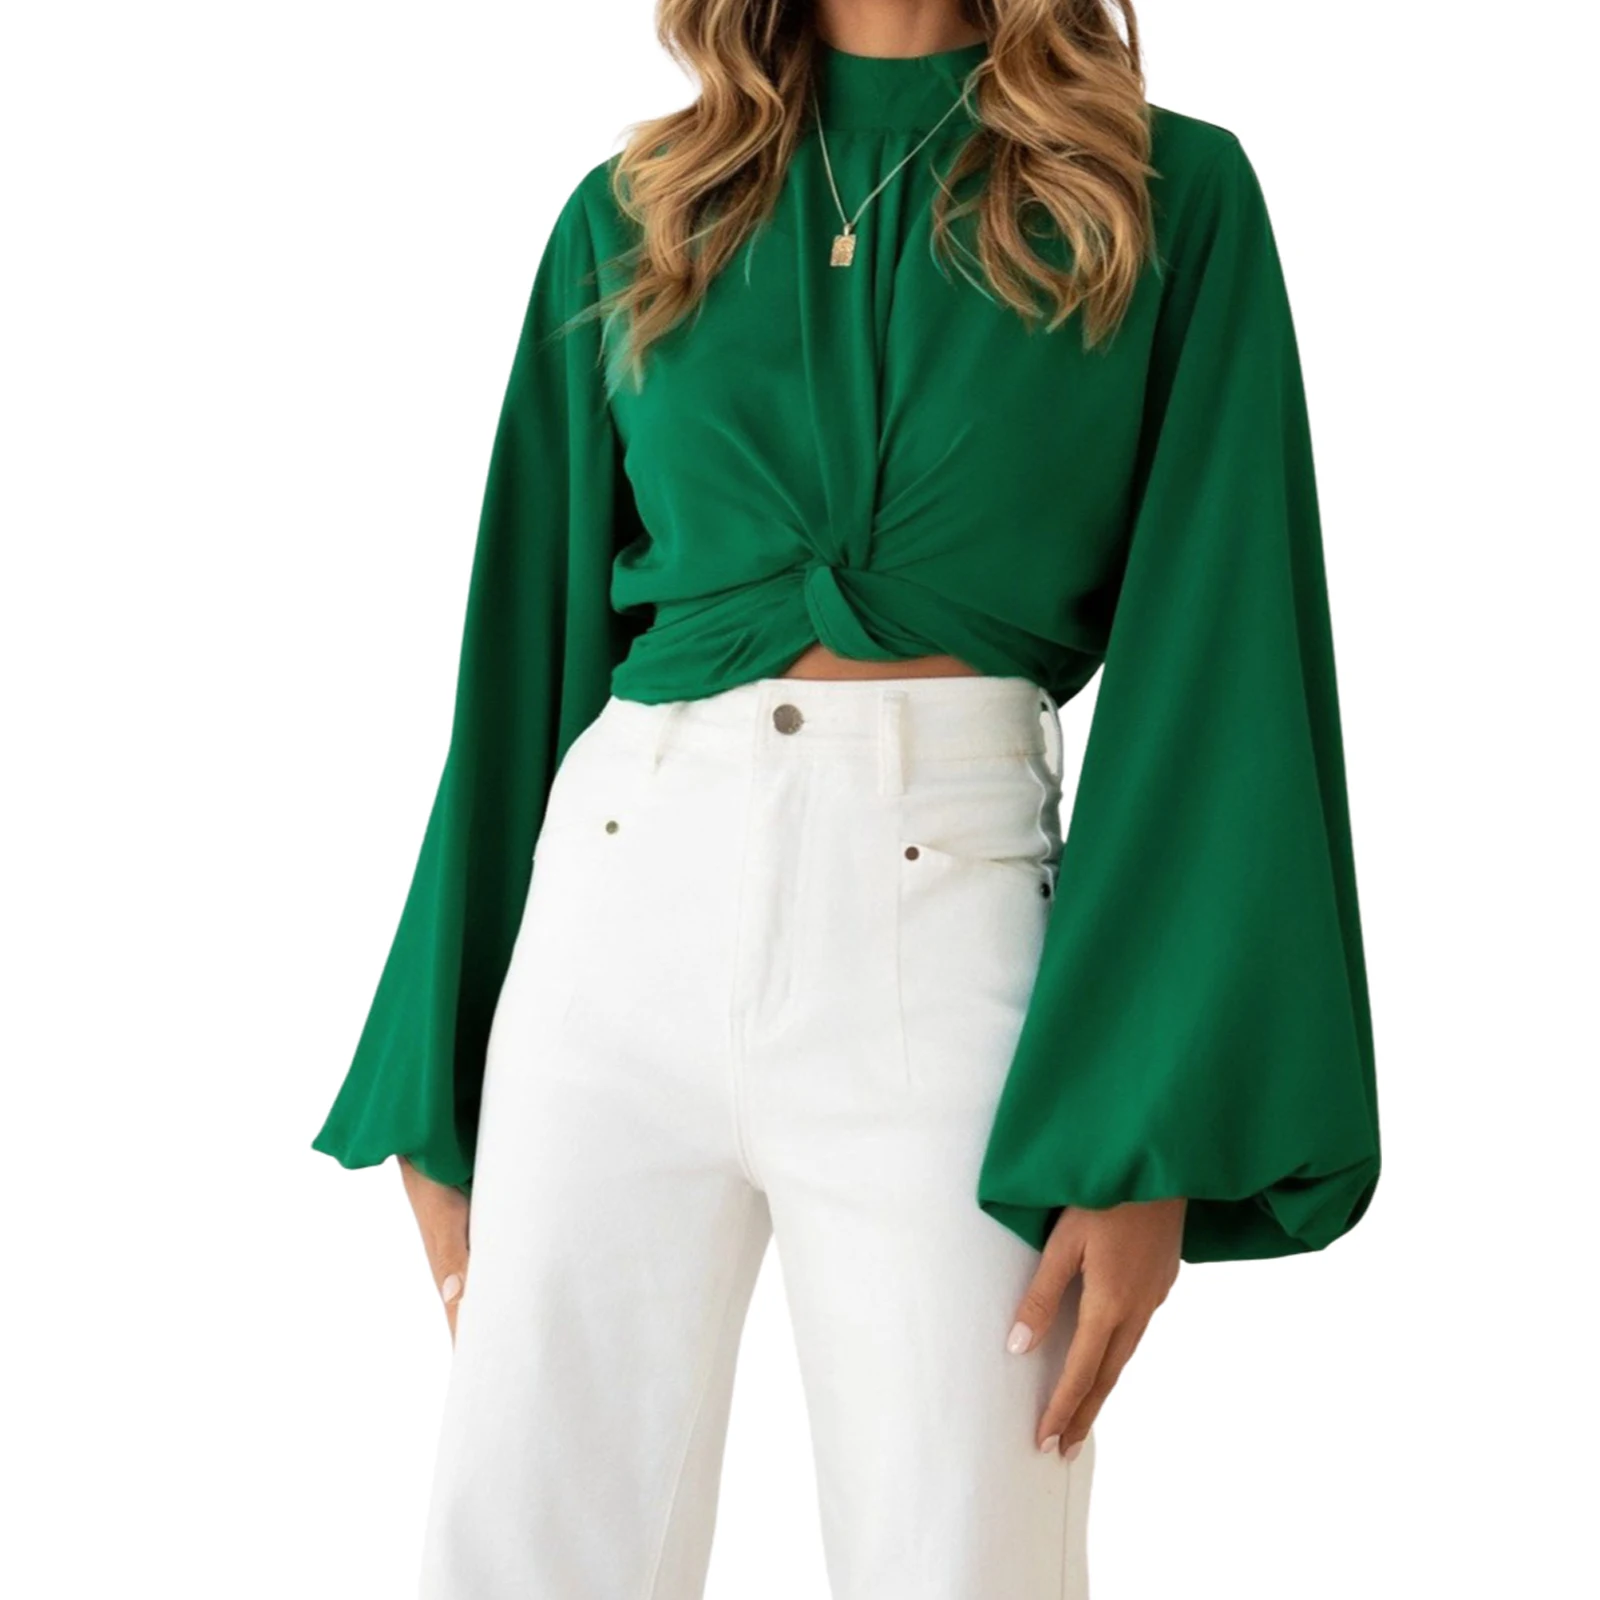 Female Blouse Solid Color Round Neck Long Sleeve Knotted Crop Tops For Ladies Green/Black/Apricot S/M/L/XL